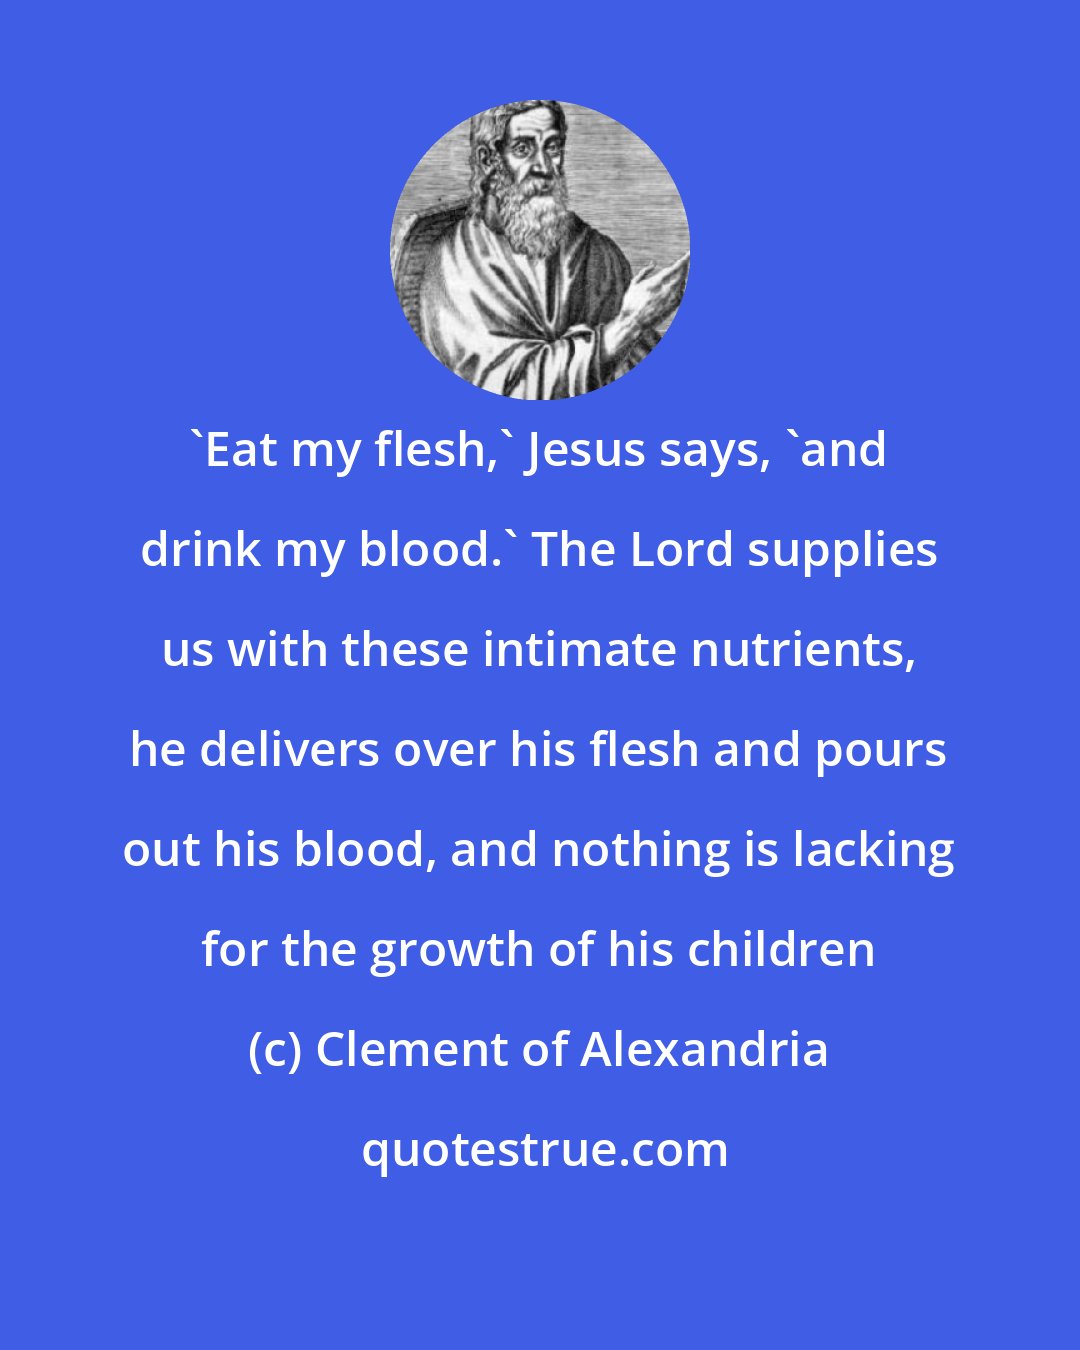 Clement of Alexandria: 'Eat my flesh,' Jesus says, 'and drink my blood.' The Lord supplies us with these intimate nutrients, he delivers over his flesh and pours out his blood, and nothing is lacking for the growth of his children